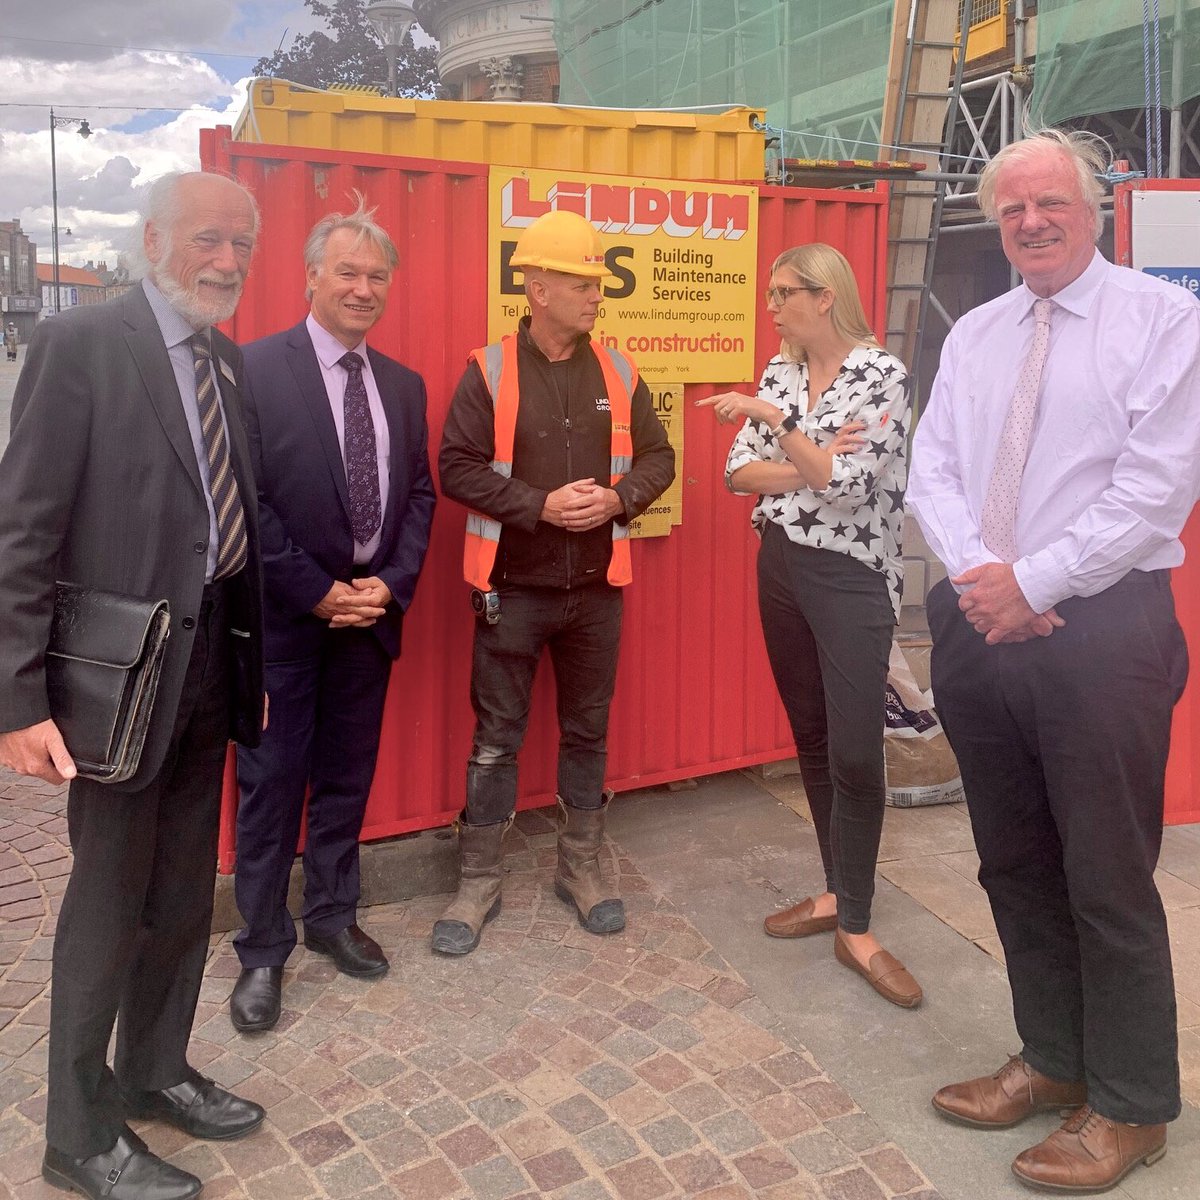 I visited Gainsborough Market Place with the leaders of @WestLindseyDC to investigate the renewal works there — the fruits of levelling-up funds I pressed the Government hard for.